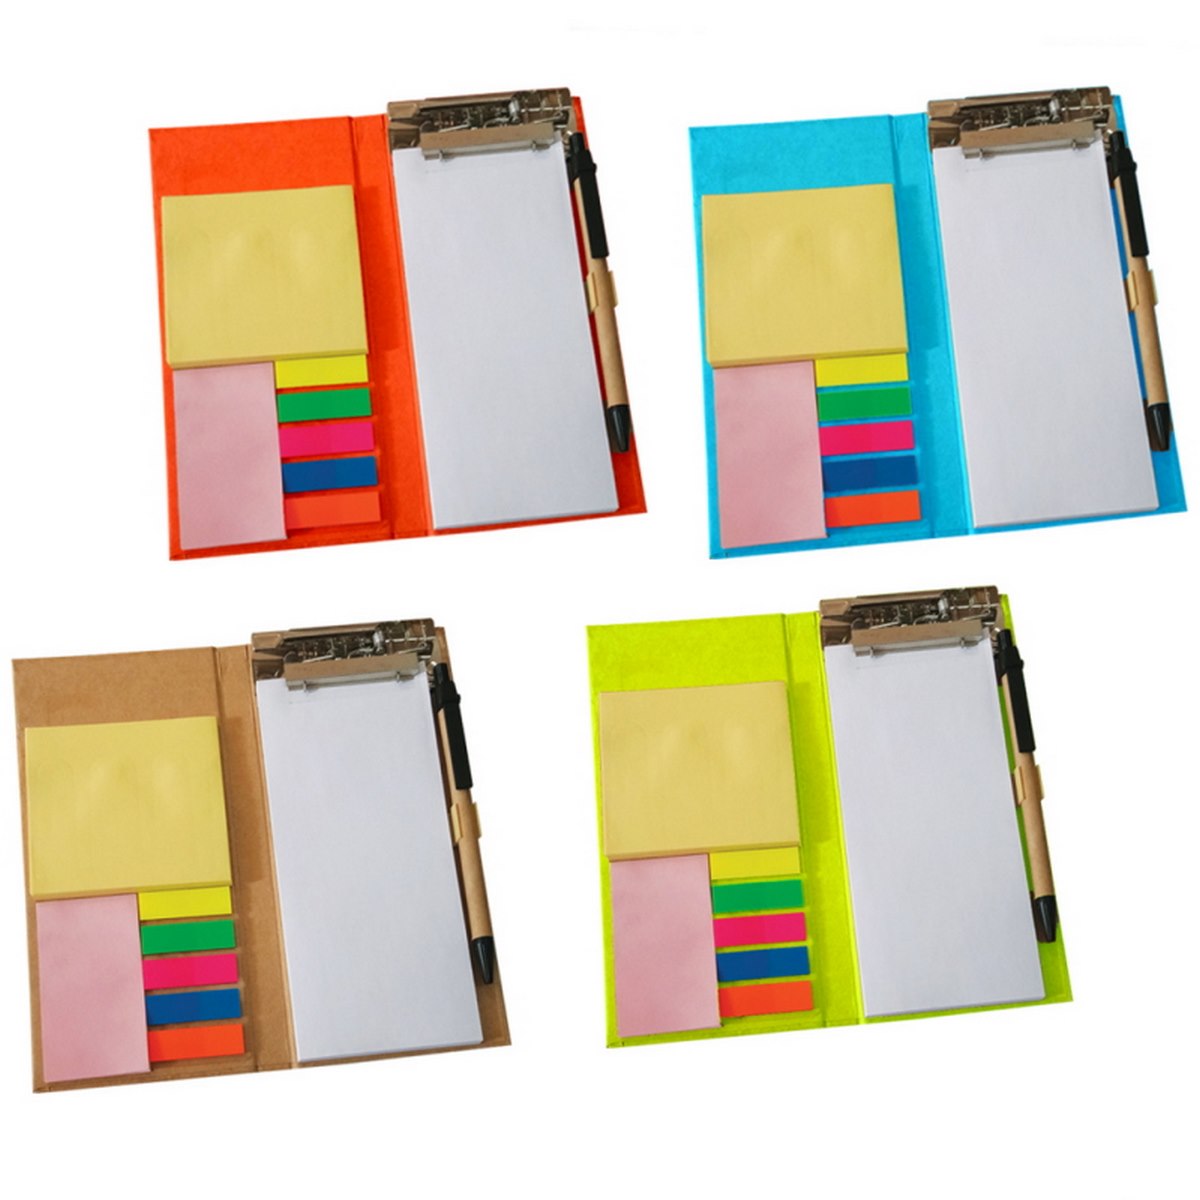 jags-mumbai Sticky Notes Memo Pad with pen and sticky notes (Bigger size)